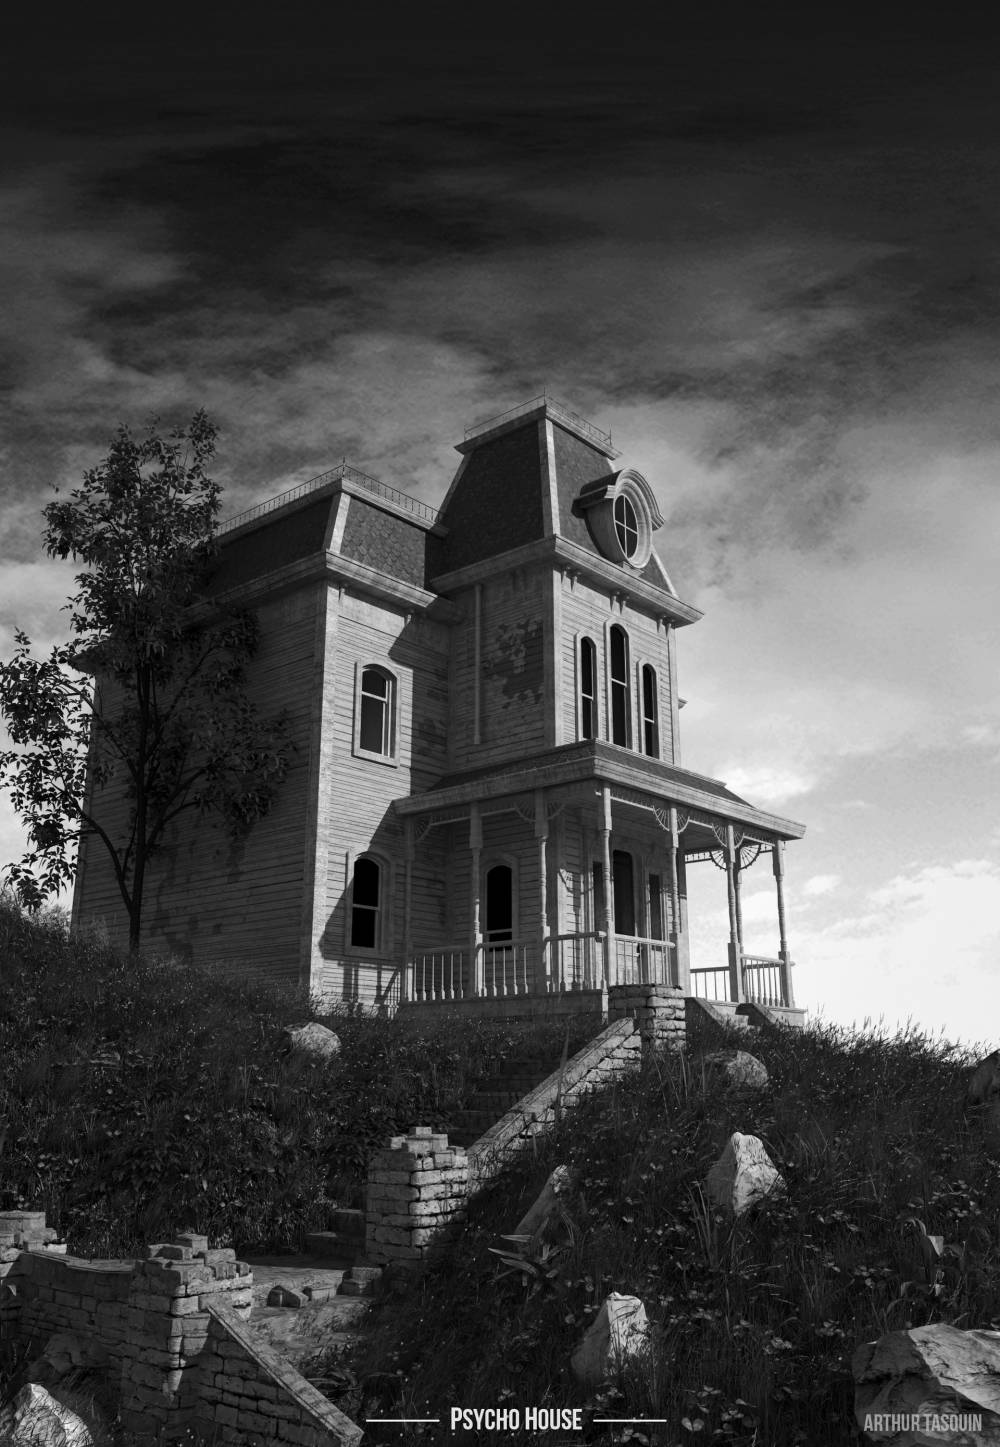  Alfred Hitchcock, House from Psycho,  1960 